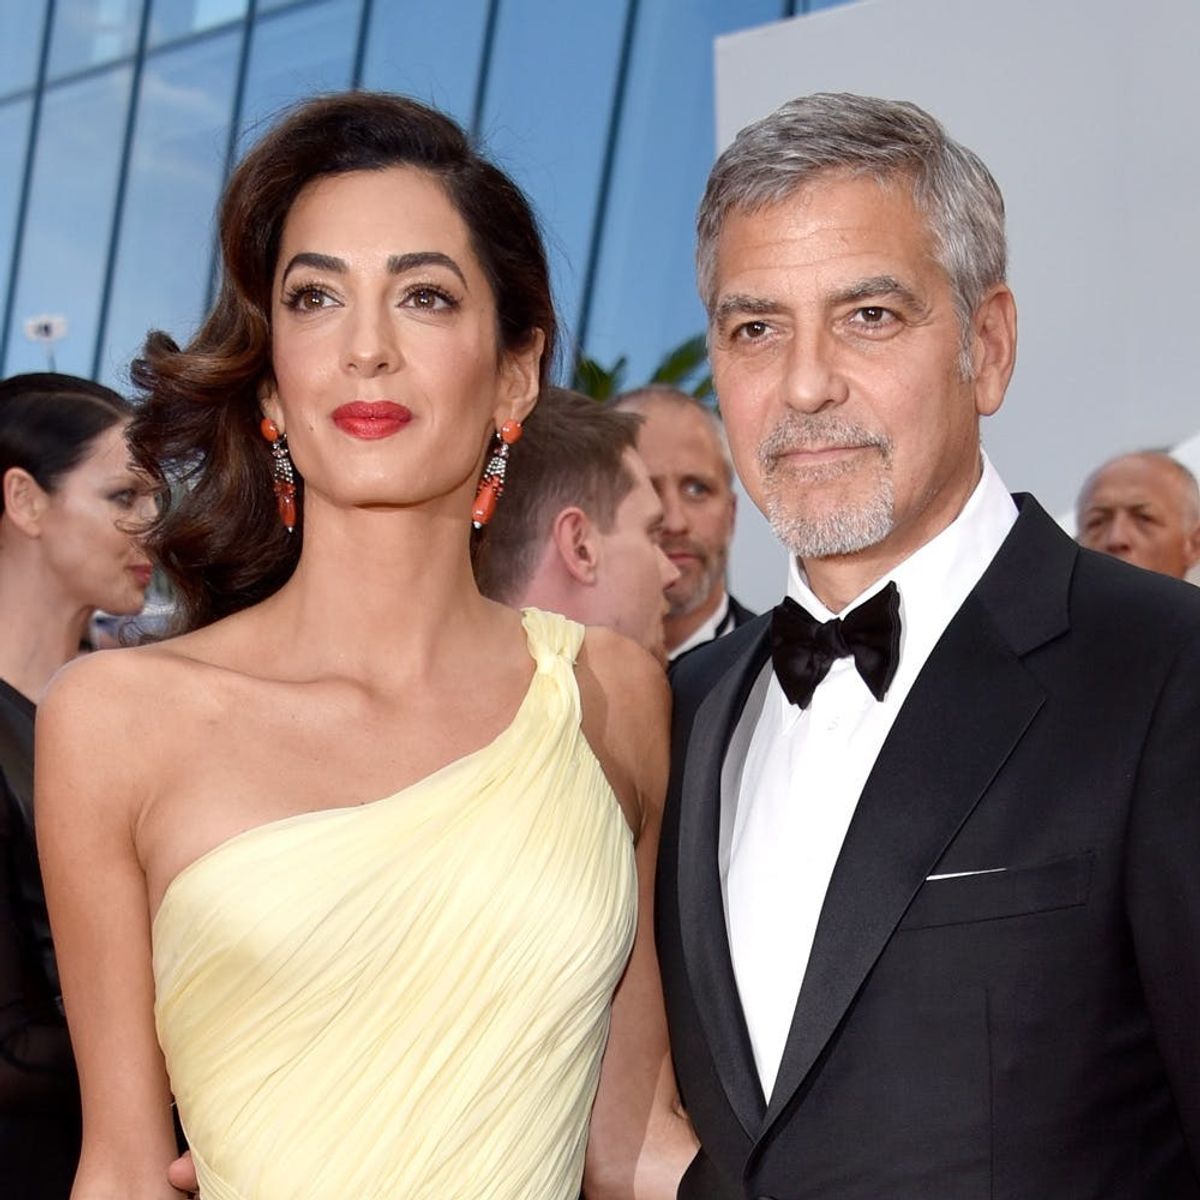 George Clooney’s Mom Revealed the Sex of the Twins and Her Announcement Couldn’t Be Sweeter